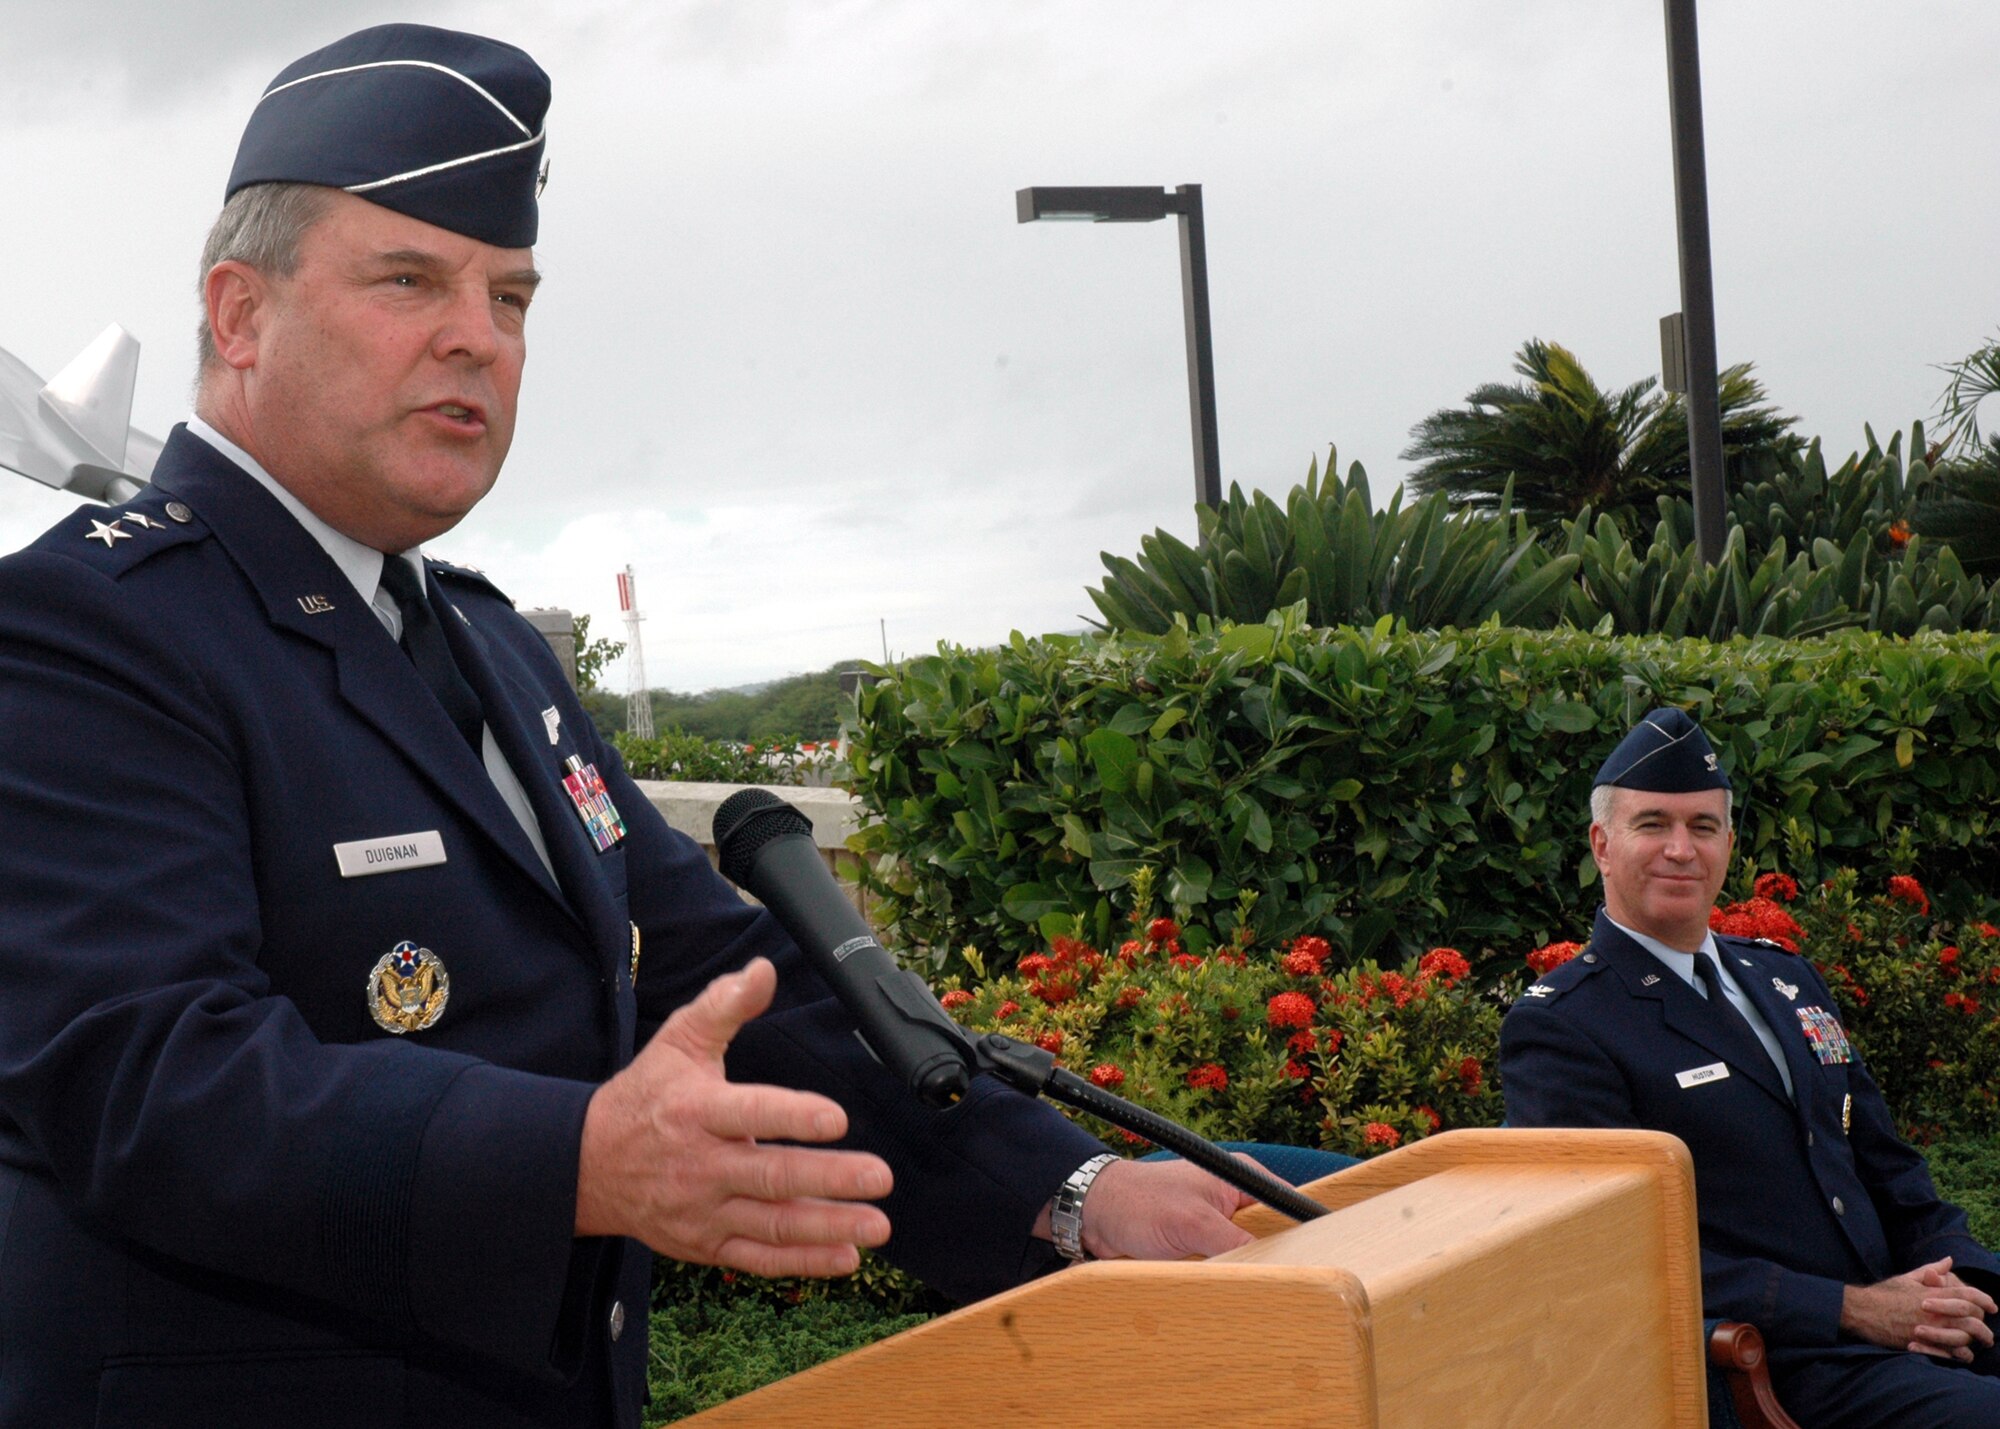 Maj. Gen. Robert Duignan, 4th Air Force commander, makes comments just prior to transferring the 624th RSG guidon to Col. Robert Huston.  General Duignan was the guest speaker at the assumption of command ceremony Jan. 10 at Hickam Air Force Base, Hawaii. Colonel Huston's responsibility as commander of the 624th RSG is managing the largest Air Force Reserve presence in the Pacific, which is comprised of five units in Hawaii and Guam.  The group provides the combatant commander more than 650 combat-ready Airmen who specialize in aerial port, aeromedical staging and civil engineering operations for worldwide employment. (Air Force photo/Master Sgt. Daniel Nathaniel)